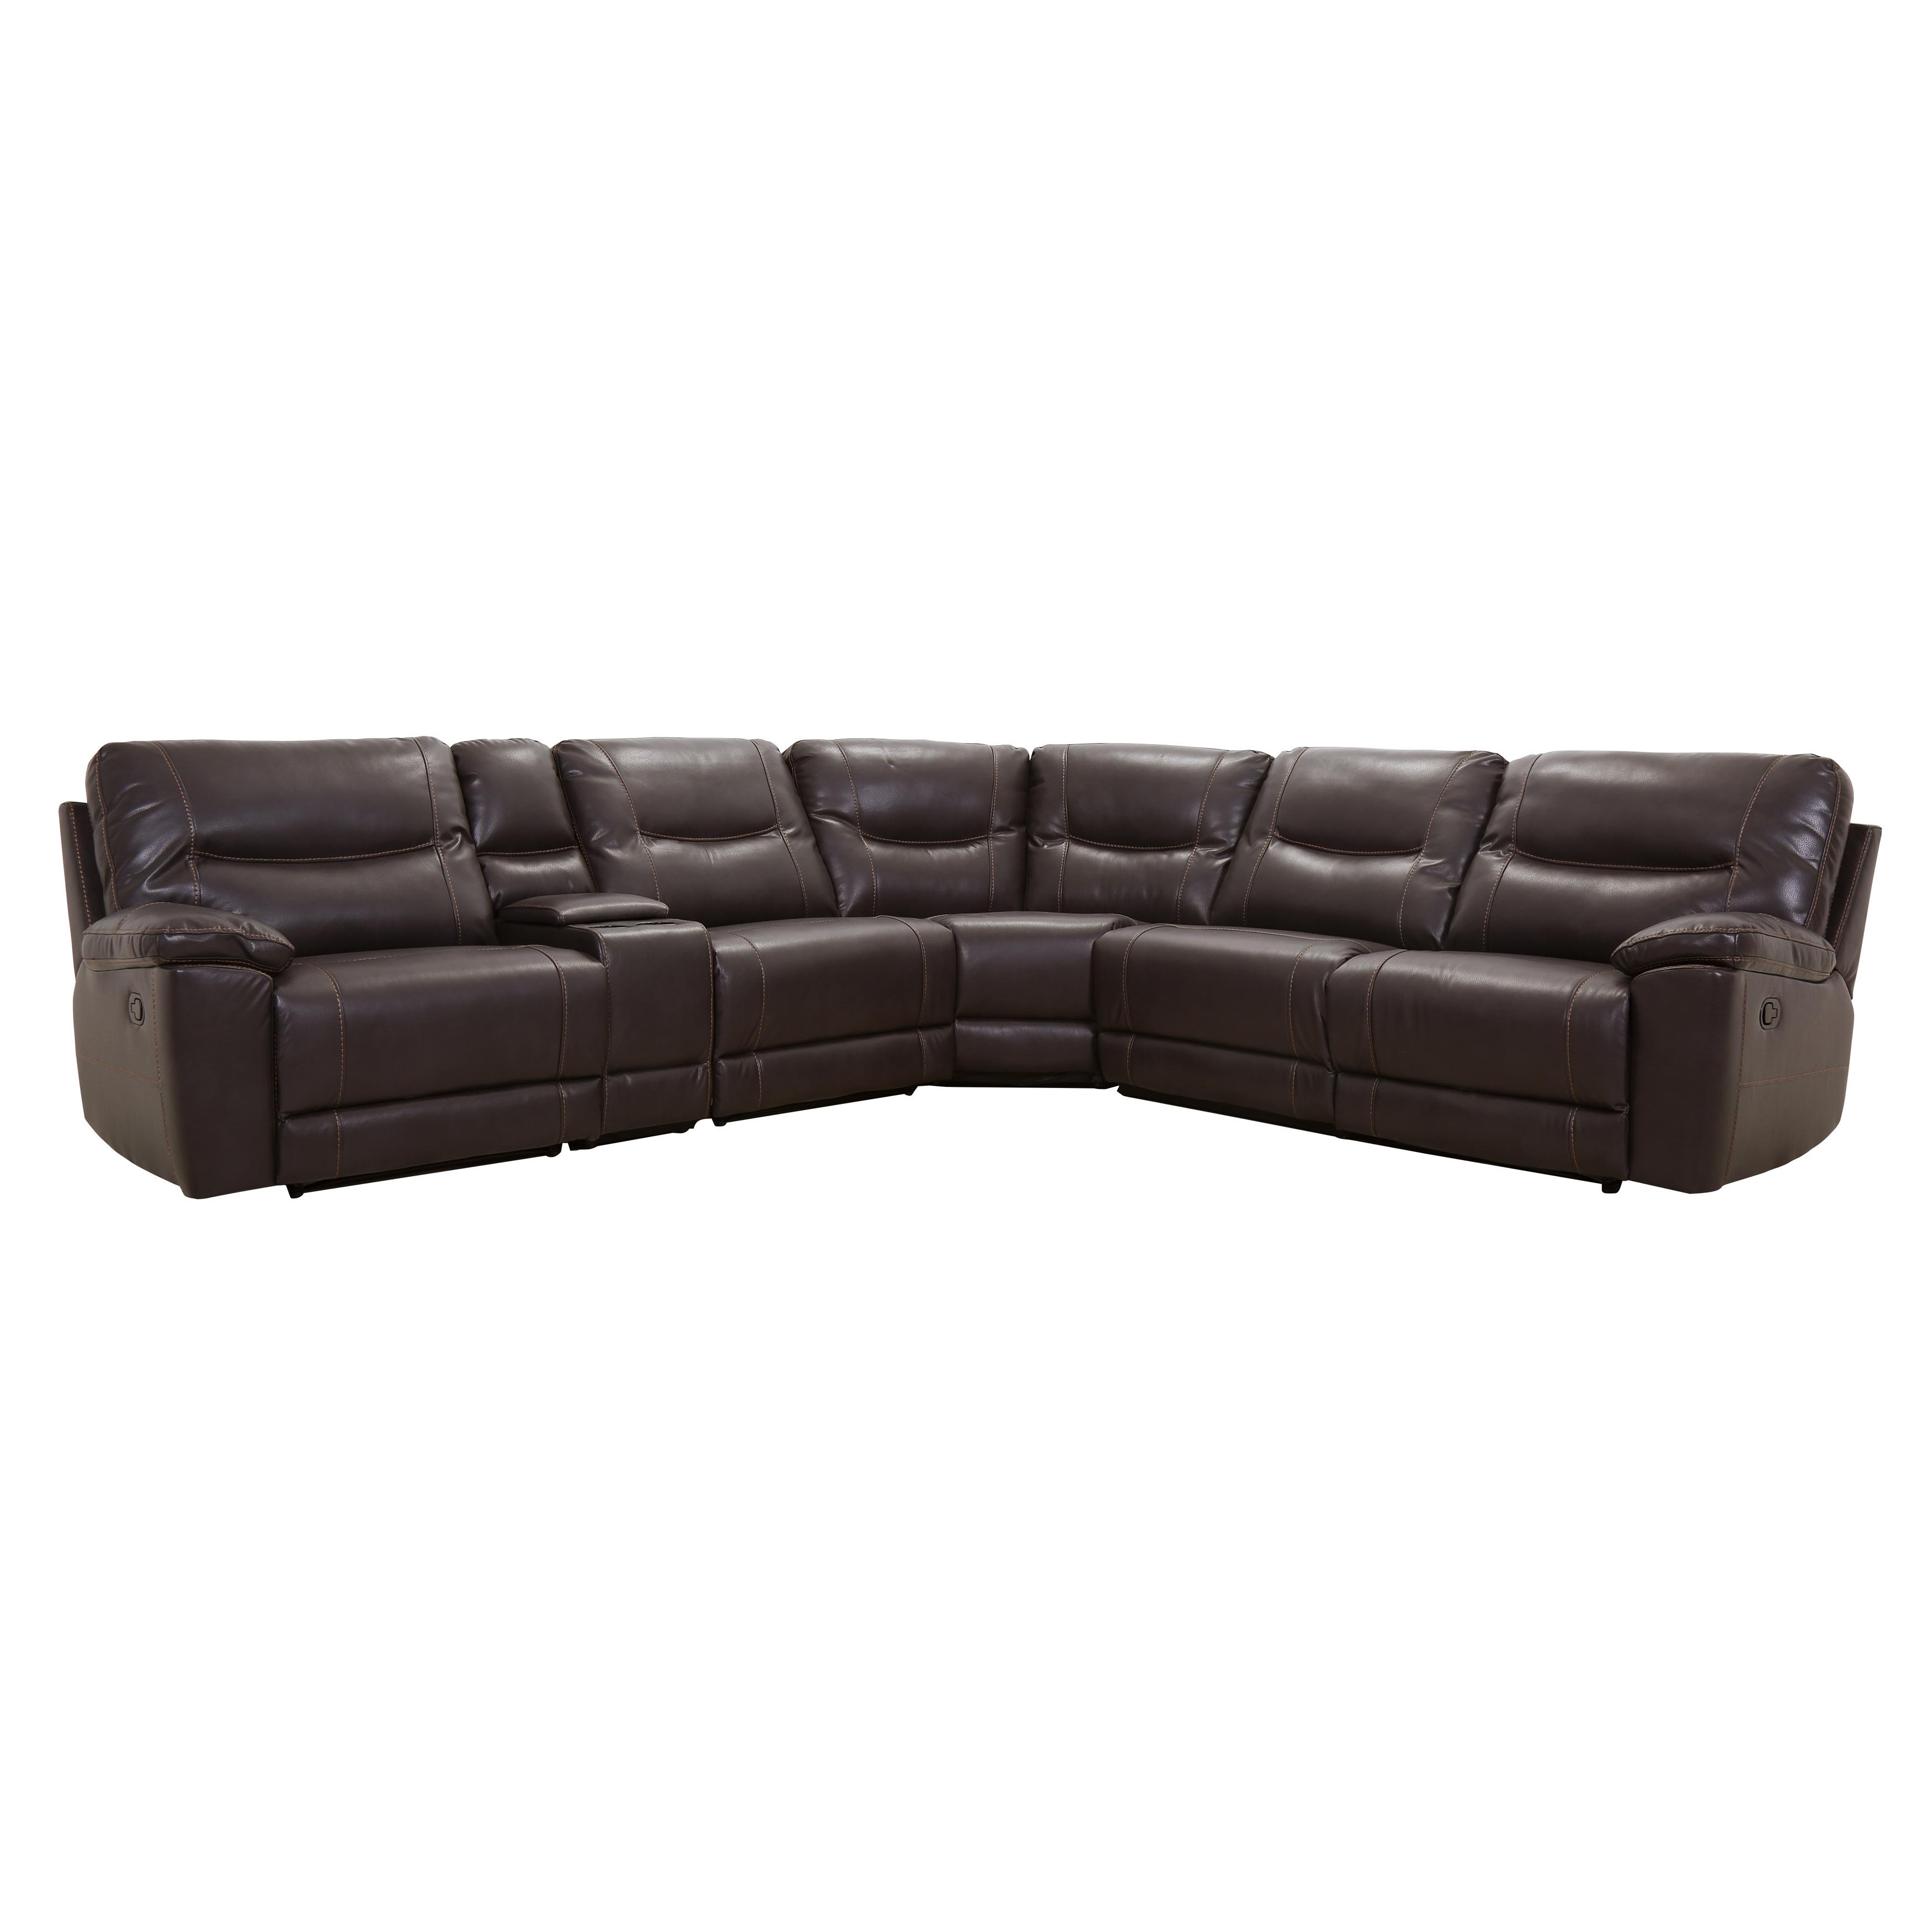 Modern Reclining Sectional 8490*6LRRR Columbus 8490*6LRRR in Brown Faux Leather